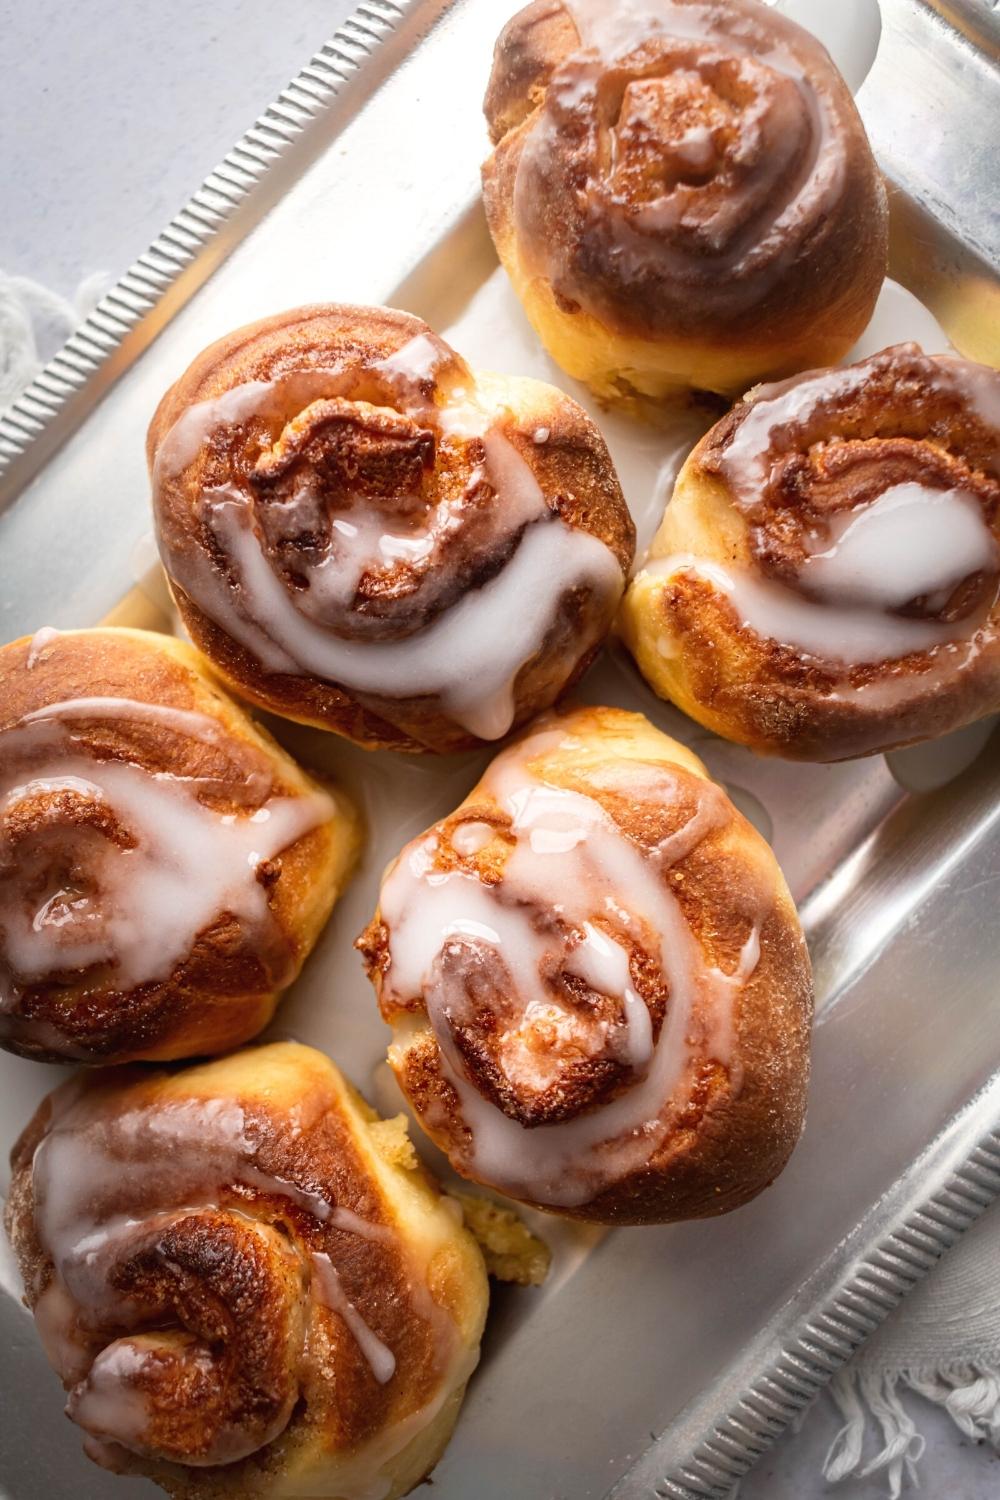 Diagonally placed silver serving dish with six cinnamon rolls on it.